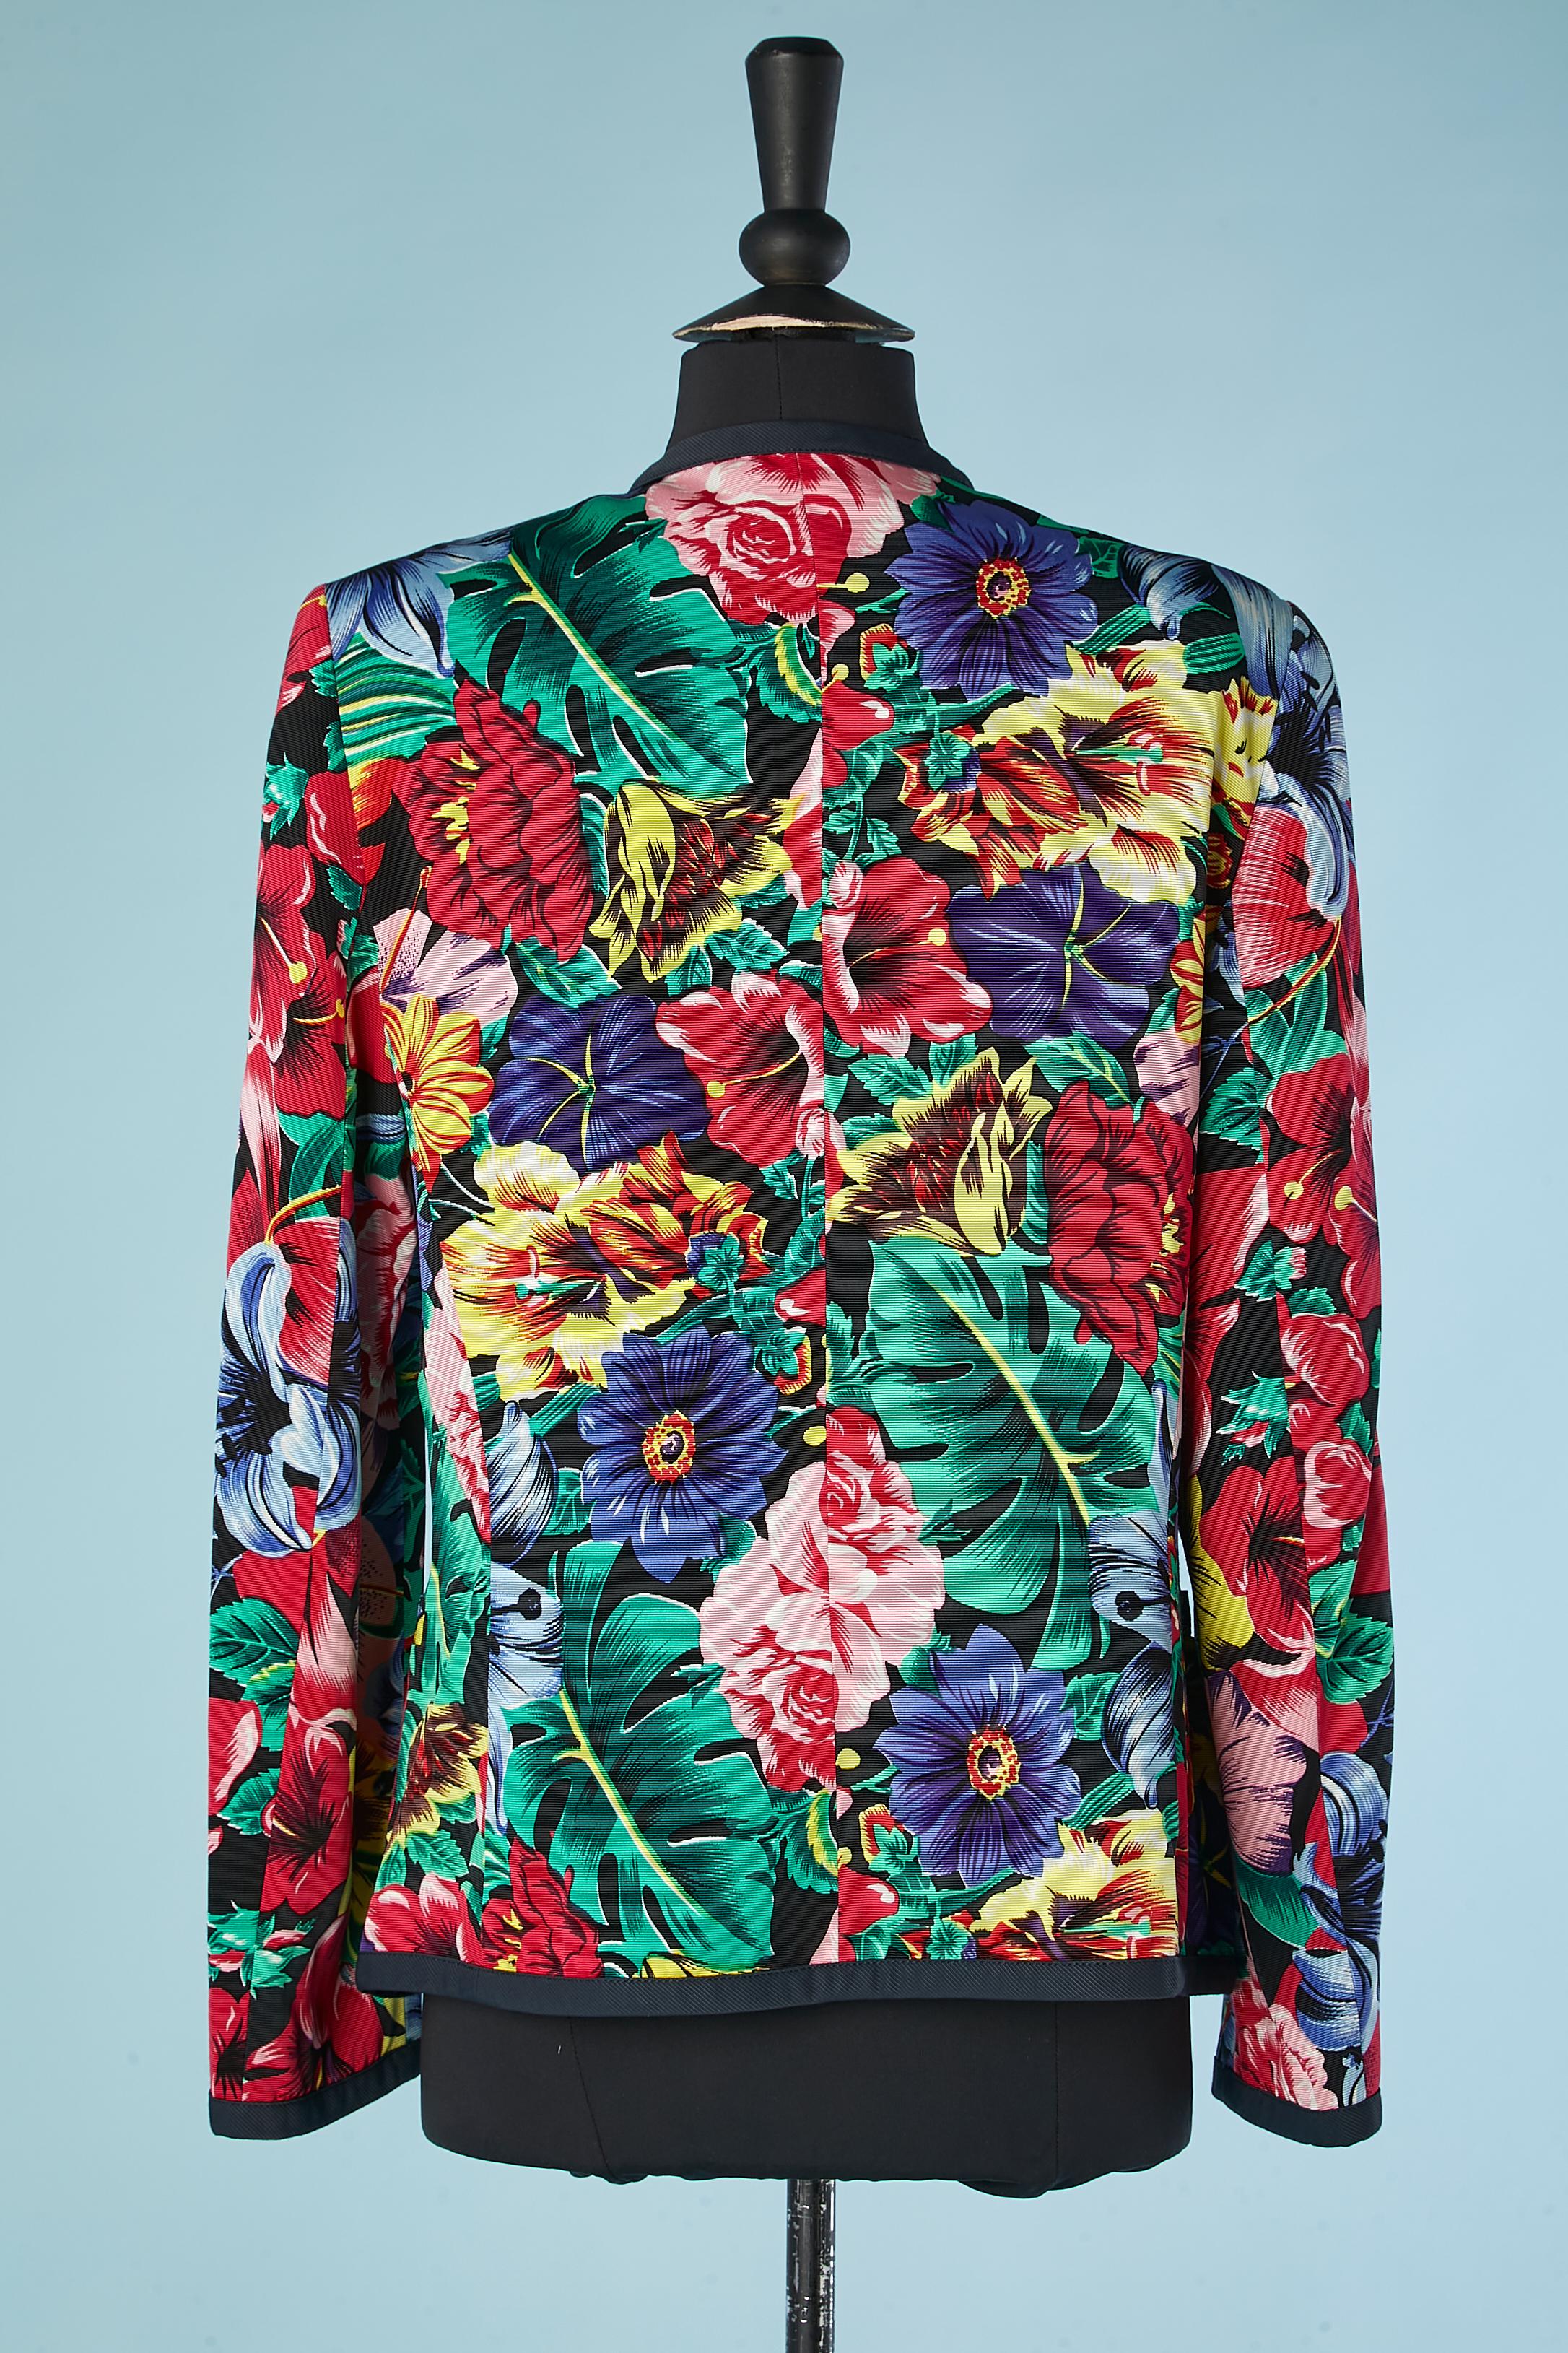 Women's Single breasted flower printed jacket with jewlery buttons Versus Gianni Versace For Sale